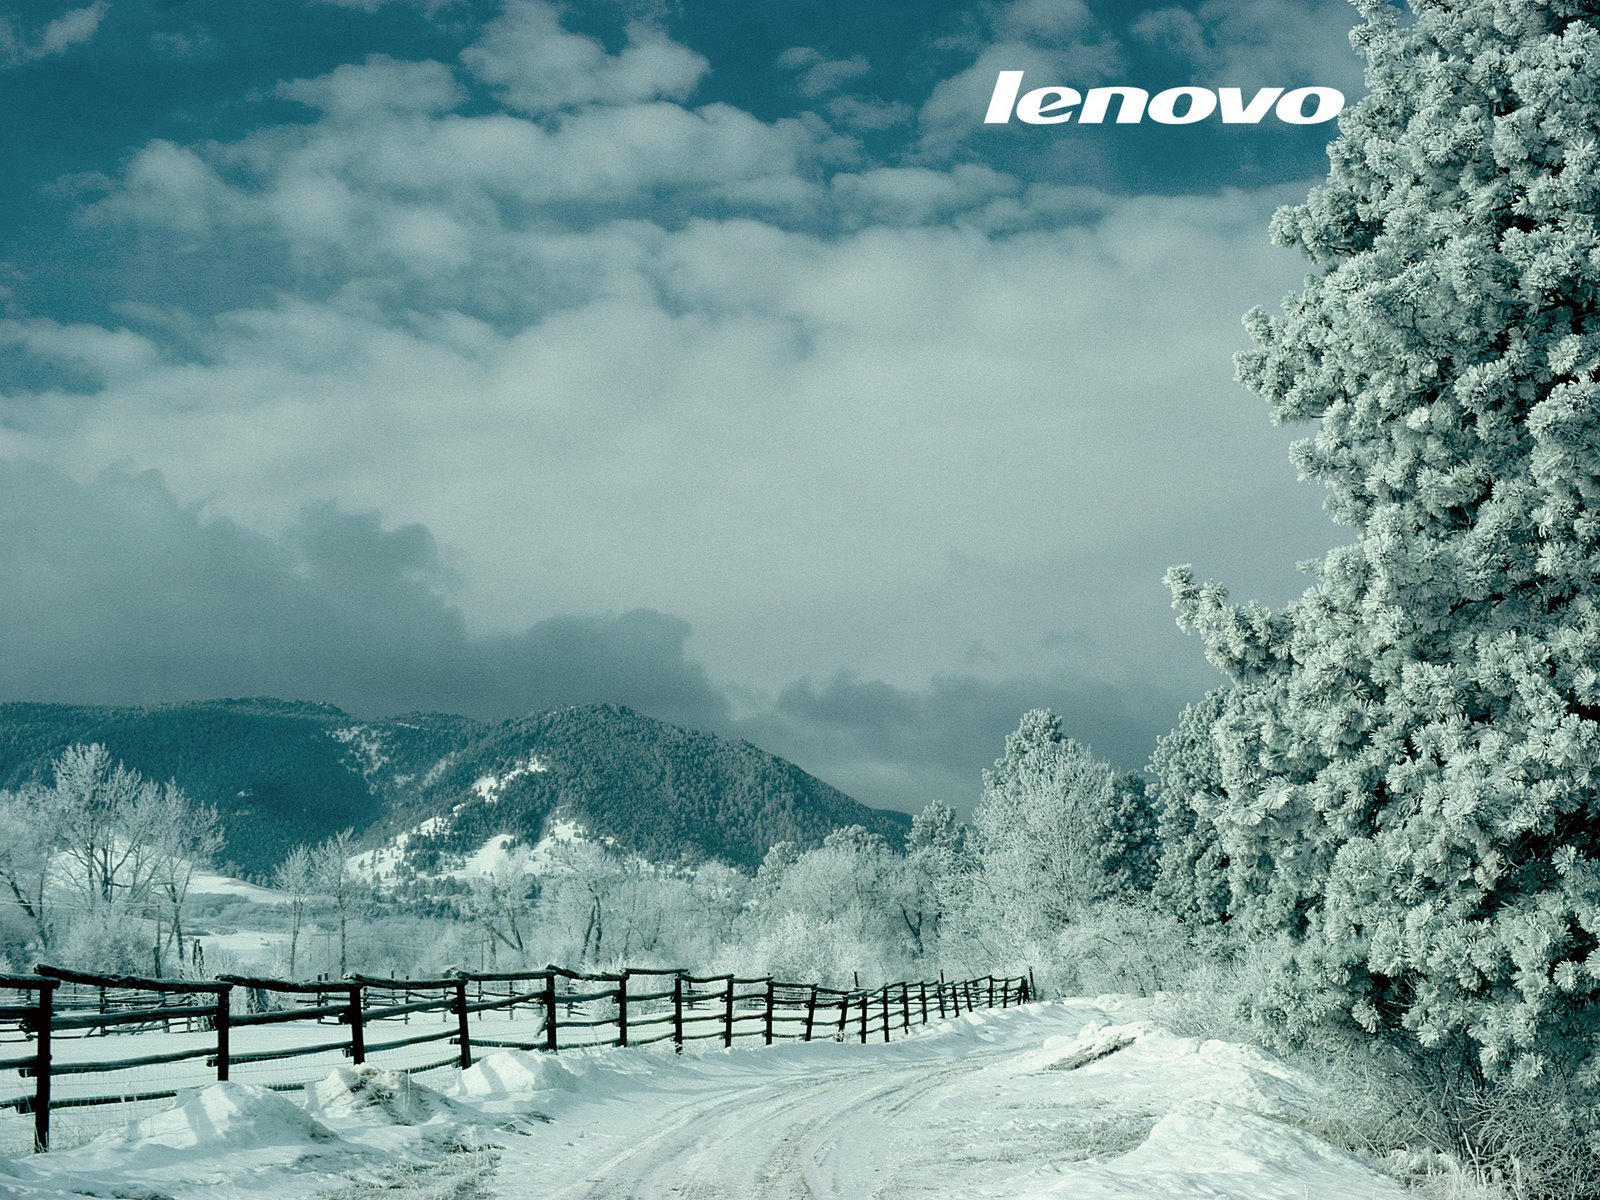 Lenovo Wallpaper Collection in HD for Download 1600x1200